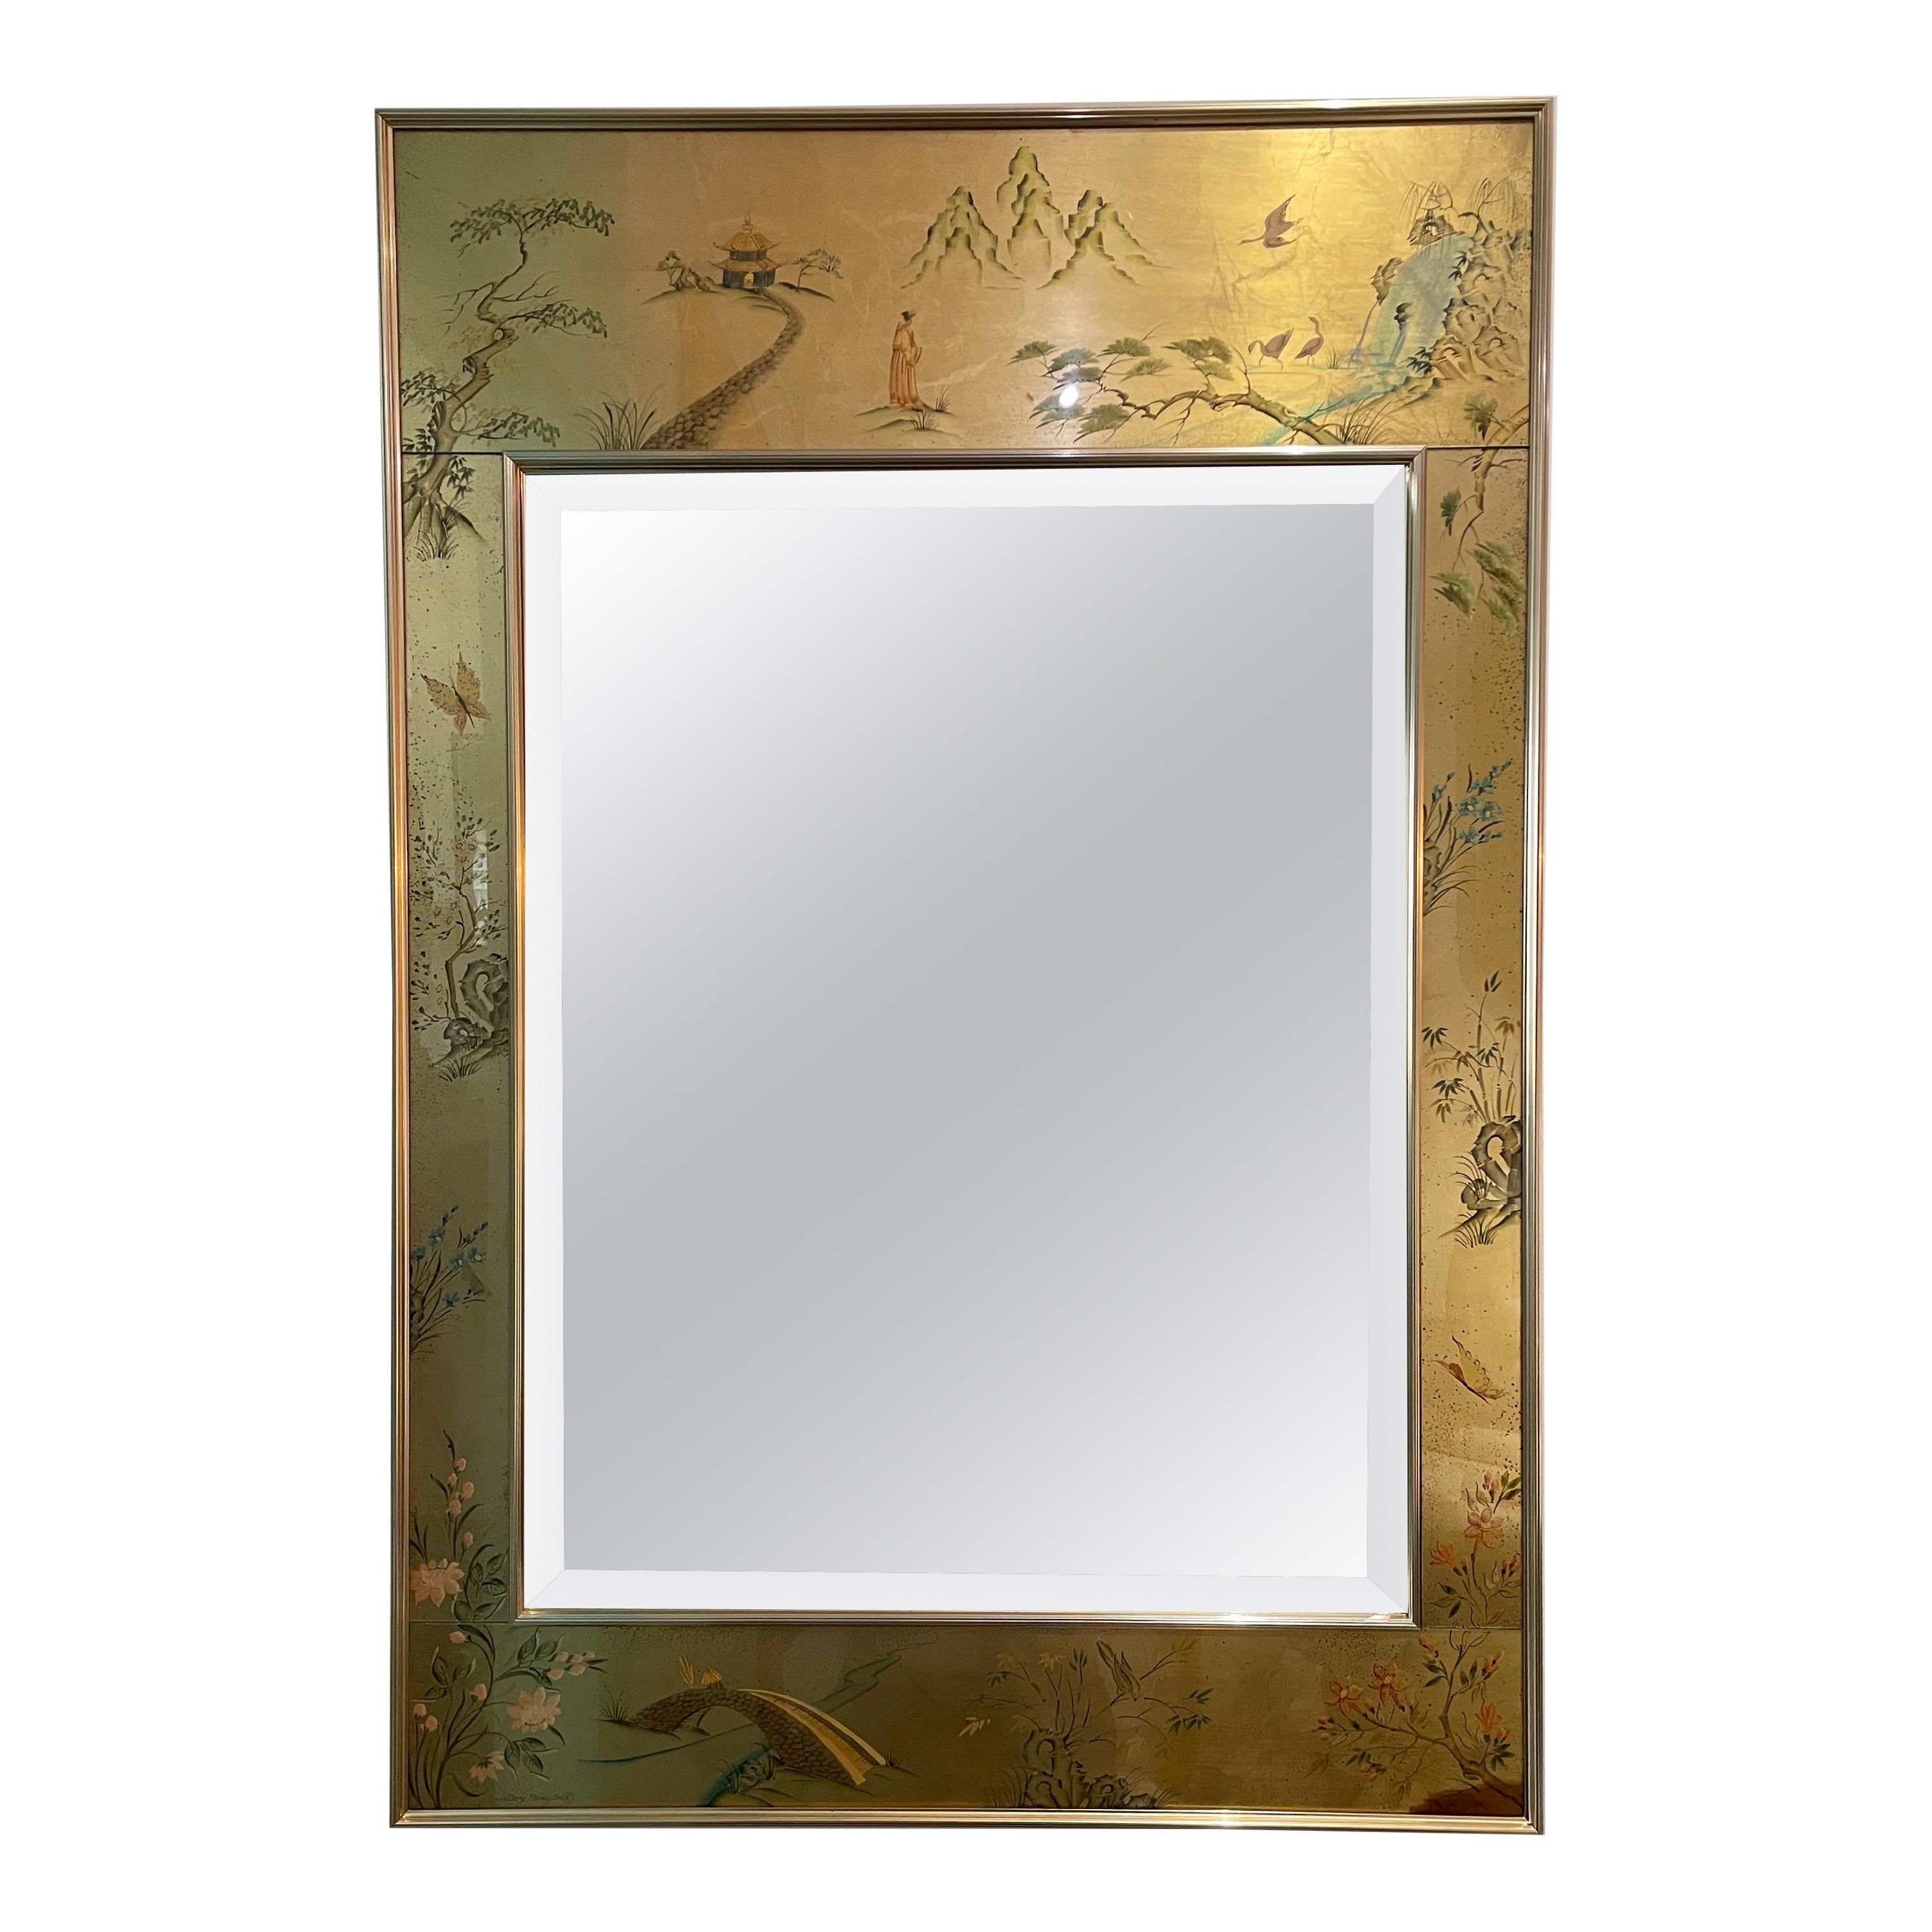 La Barge Eglomise Wall Mirror For Sale